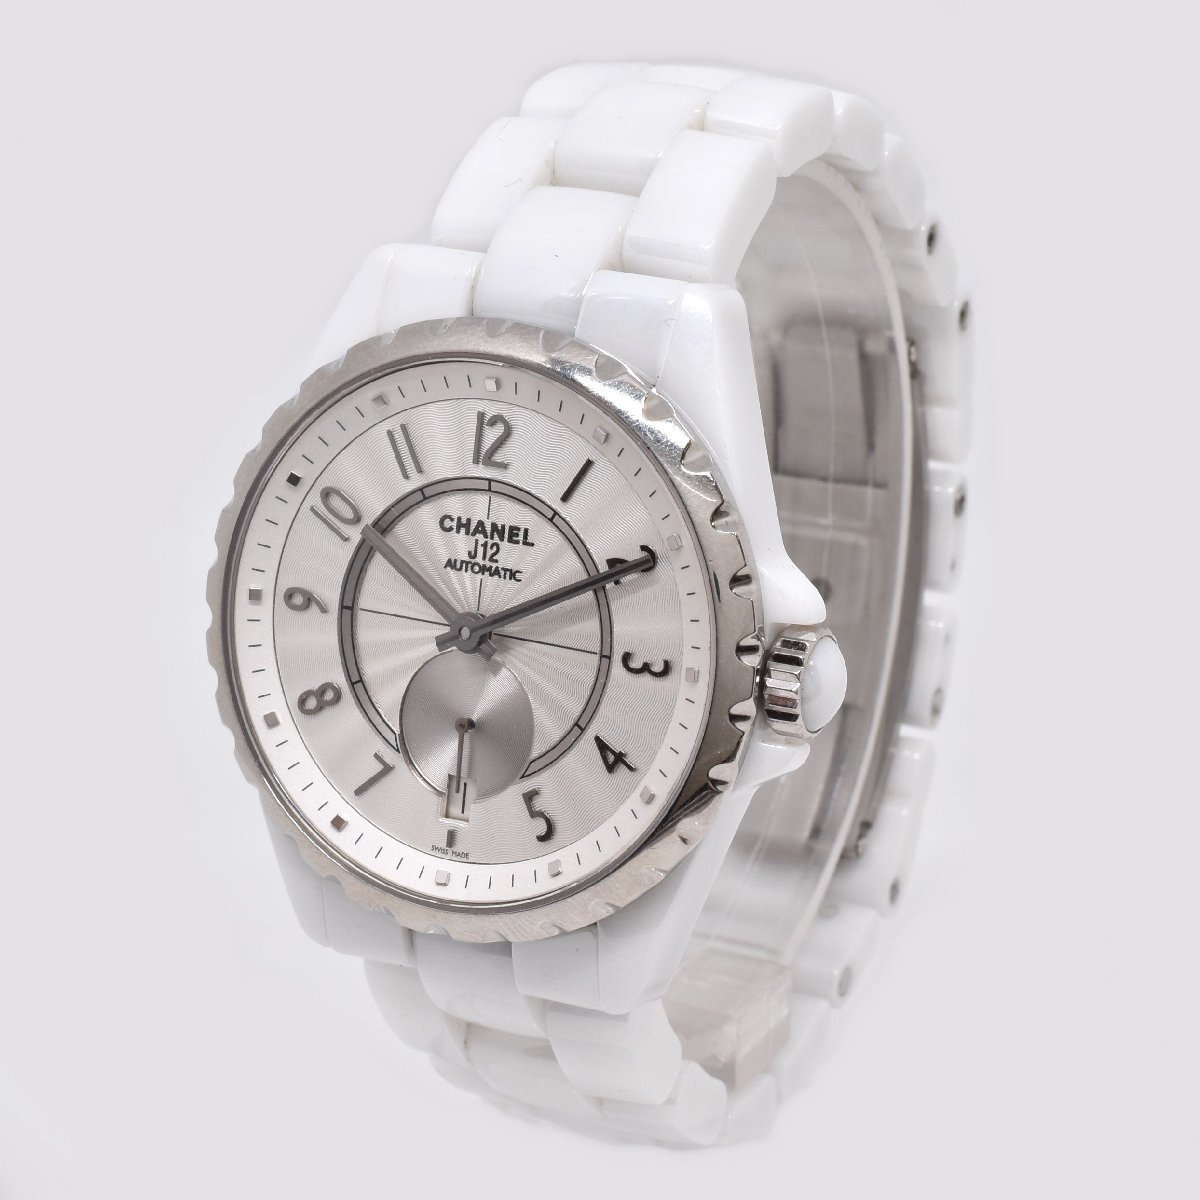 Chanel J12 H1008 White Ceramic Chronograph 41mm Automatic Date